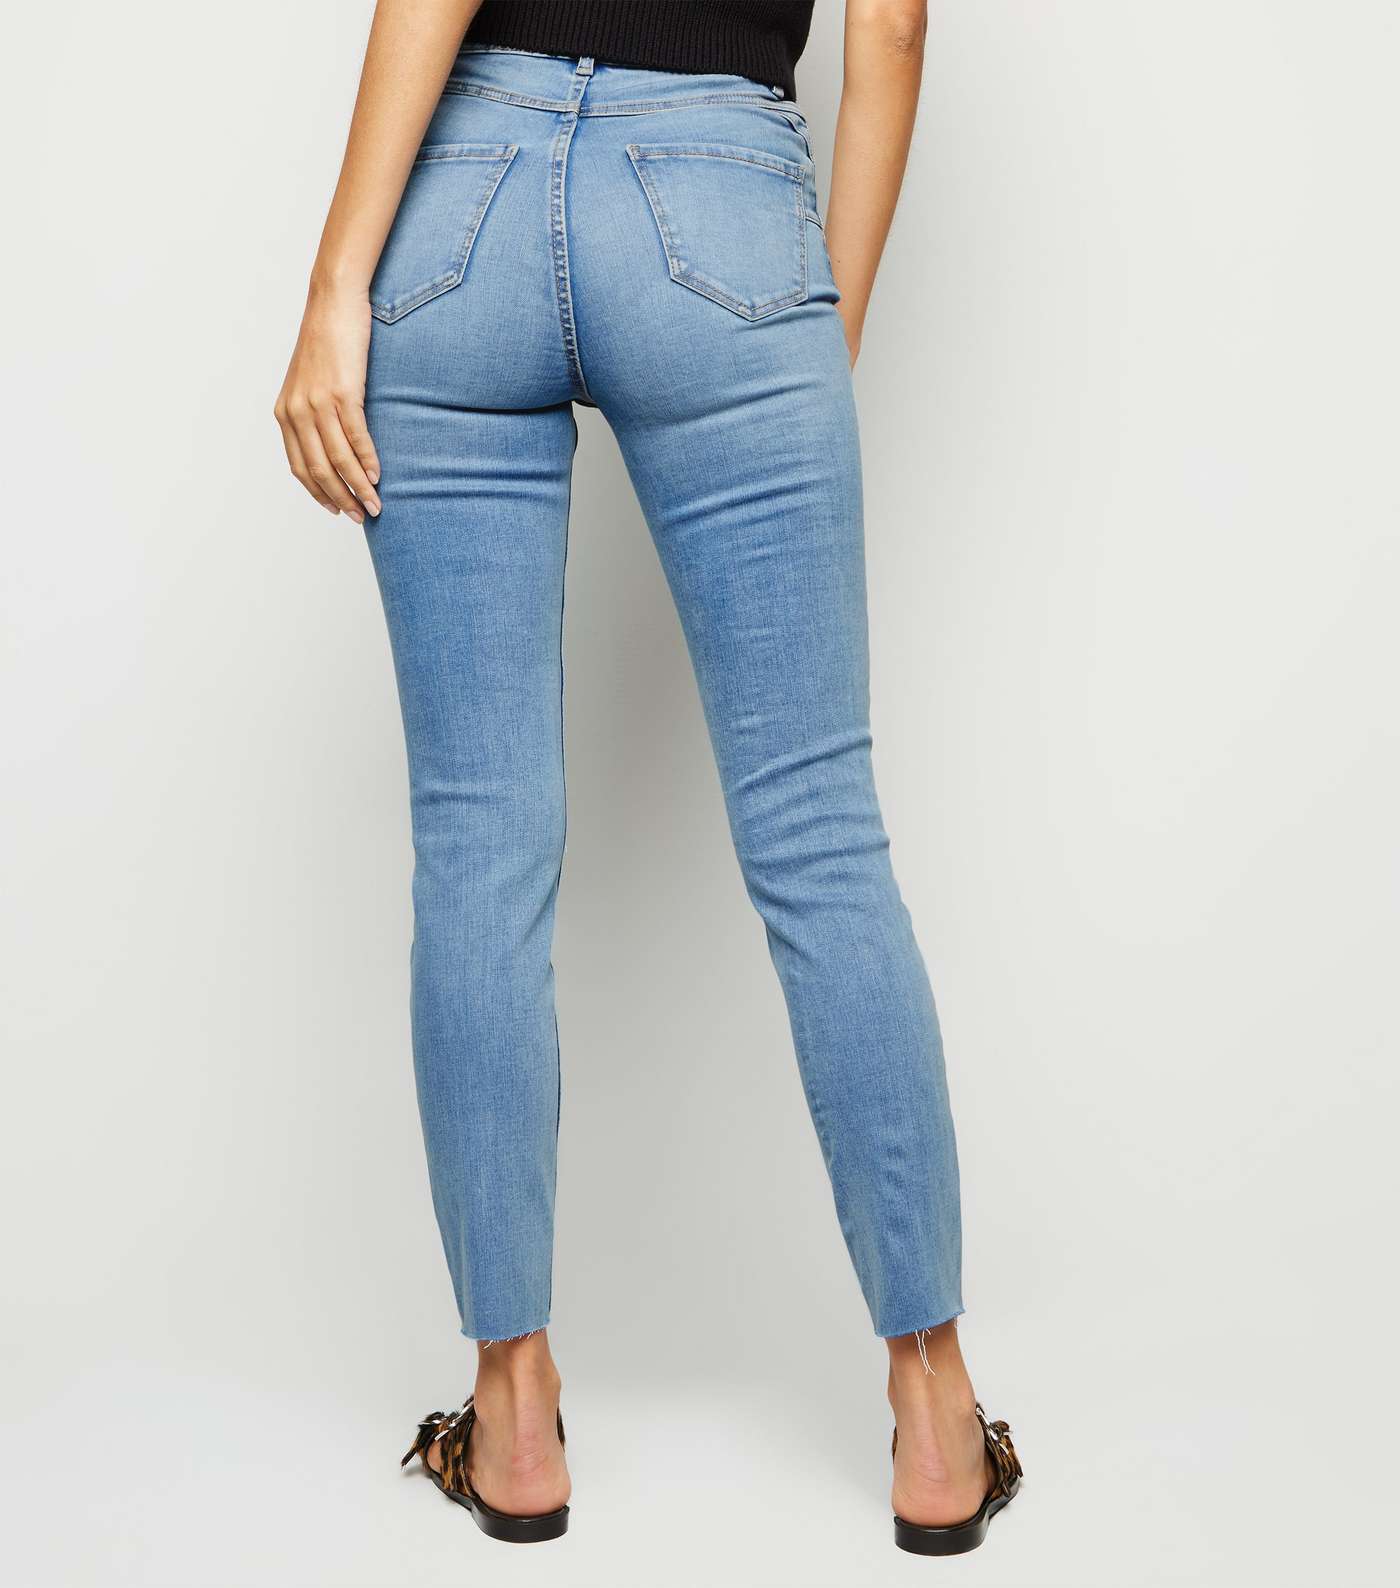 Pale Blue 'Lift & Shape' Ripped Skinny Jeans Image 5